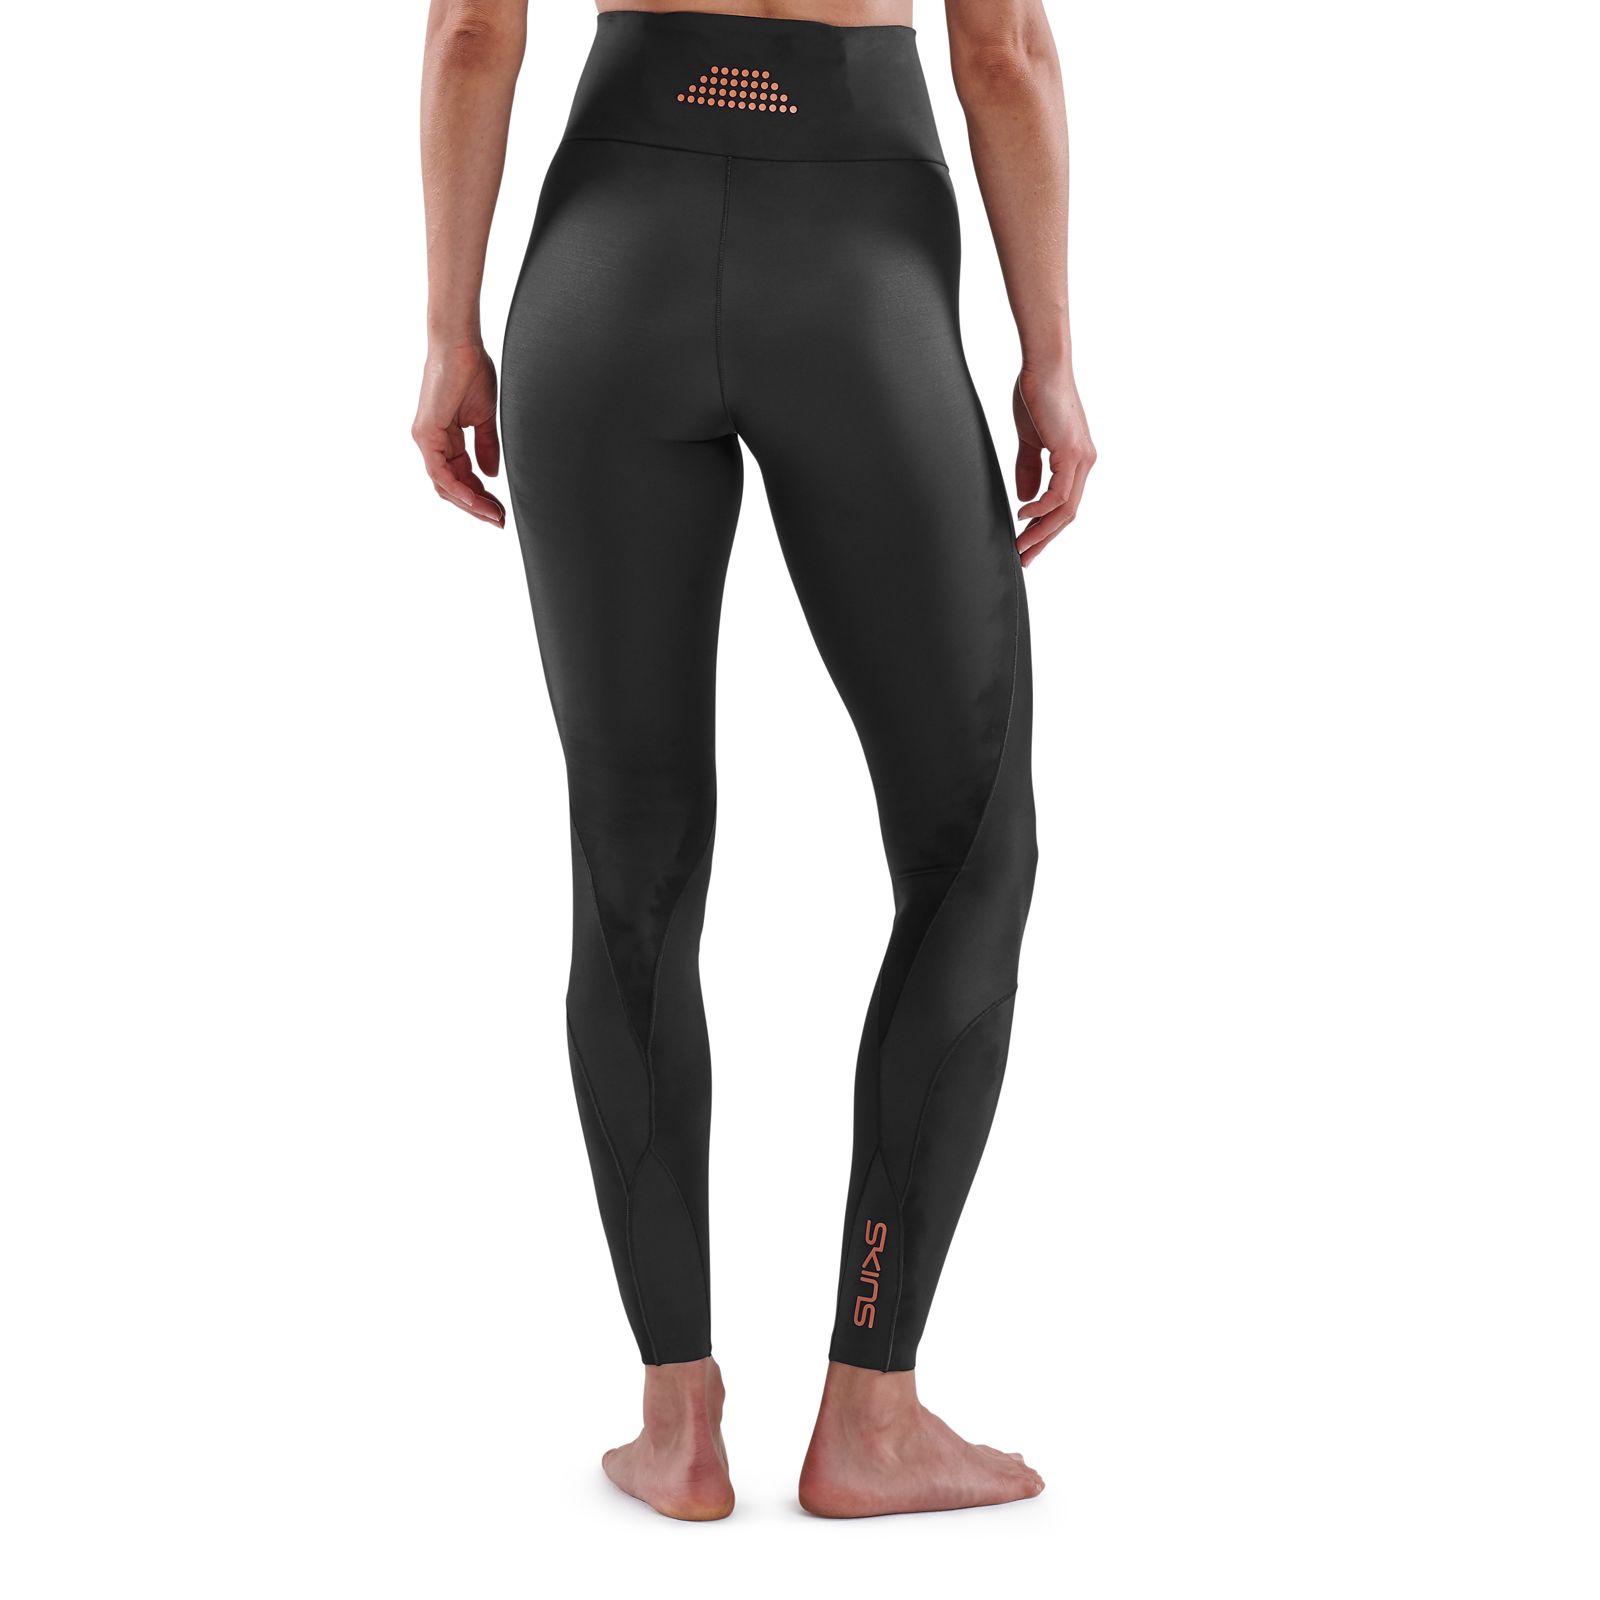 SKINS Women's A400 Compression 3/4 Tights, Black/Gold, Large